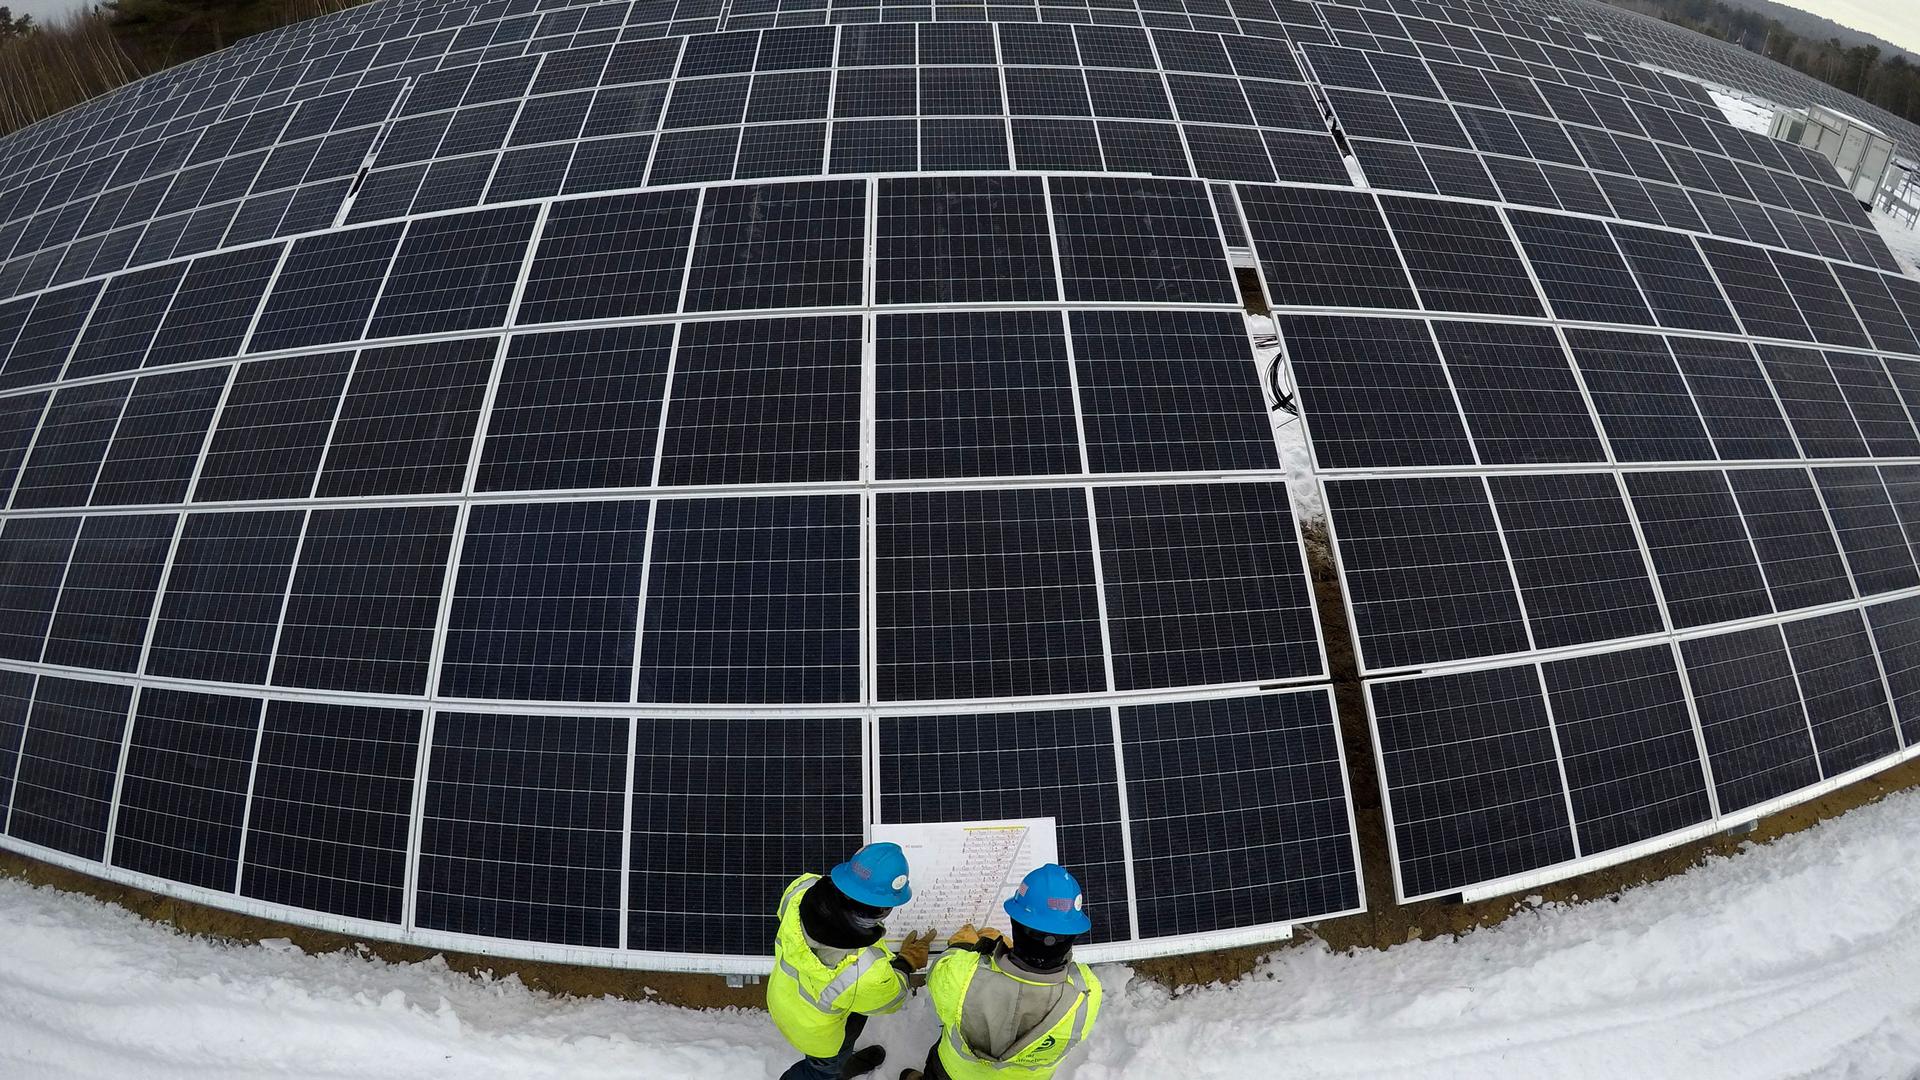 Several rows of large solar panels are shown with a wide angle lens with two people at the bottom of the photo wearing yellow safety vests and hard hats.